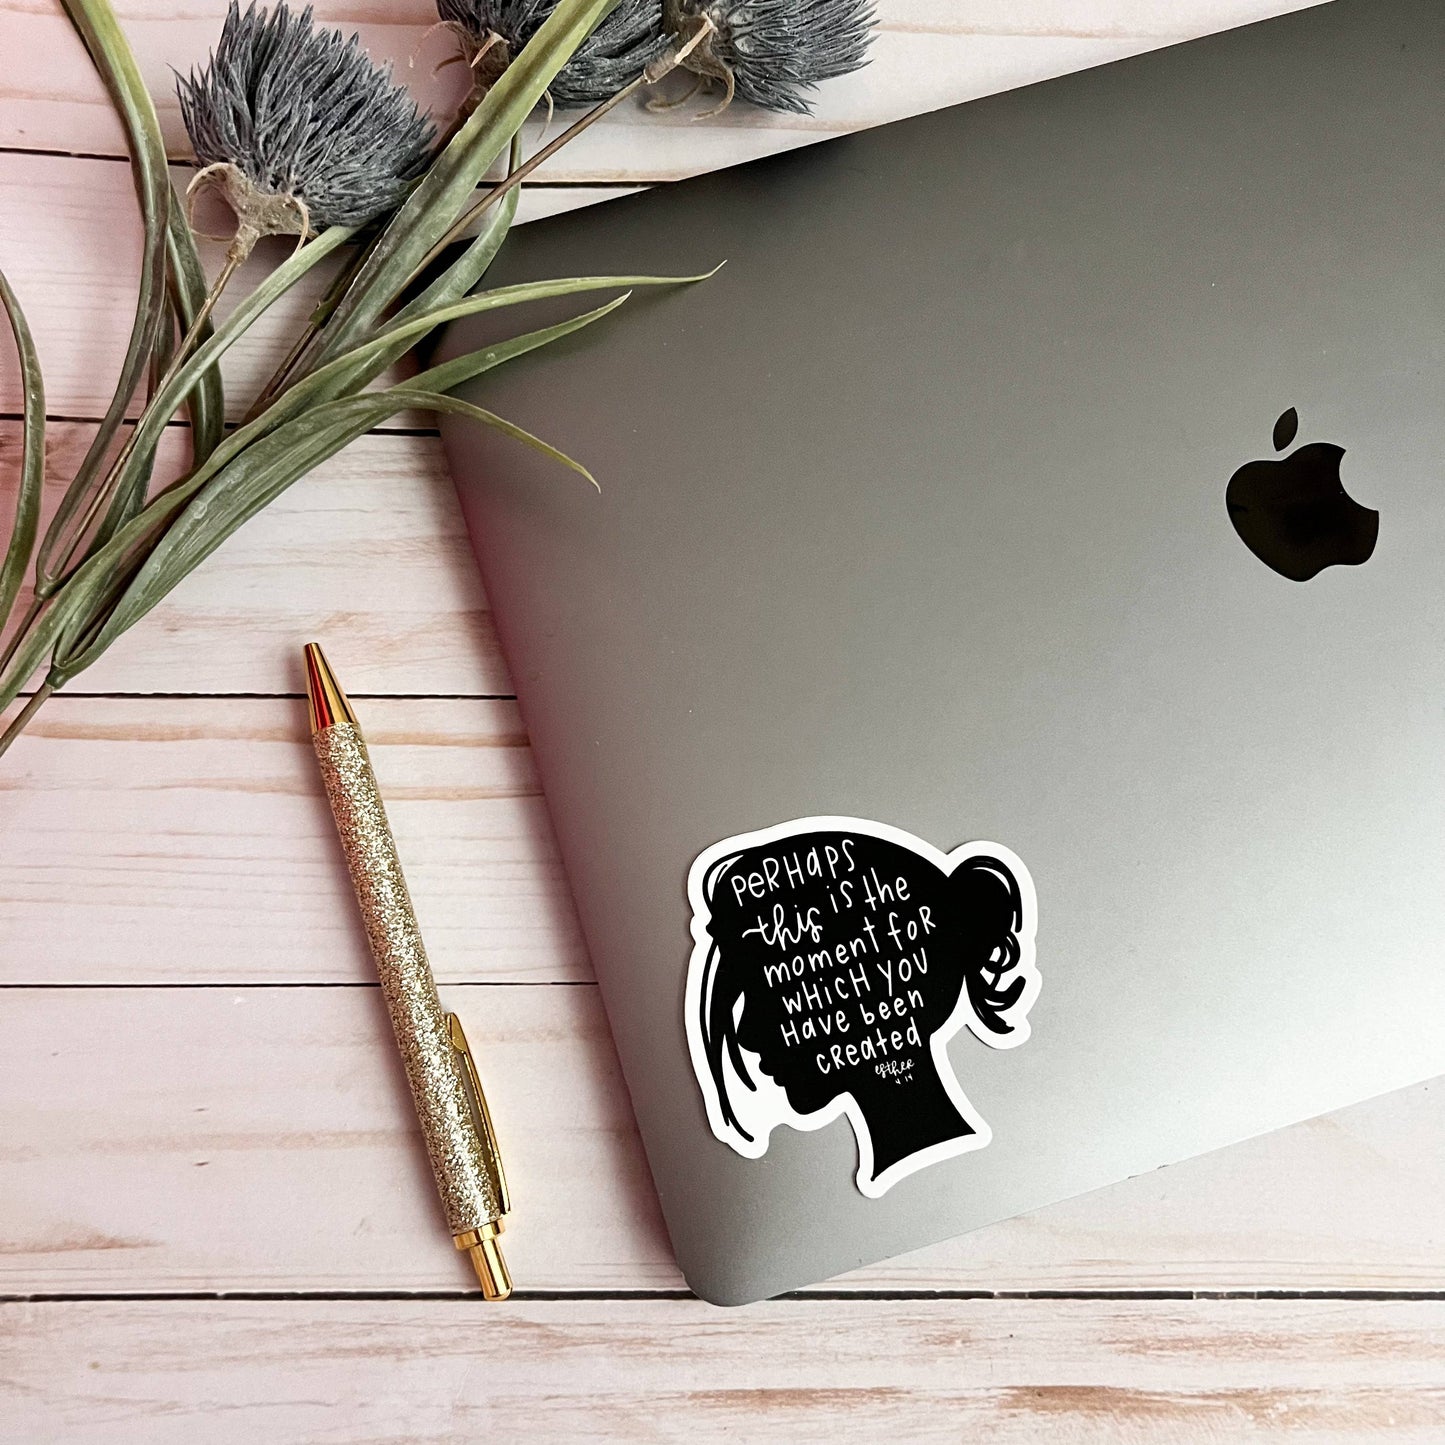 Esther 4:14 Sticker *FREE SHIPPING with any order over $10